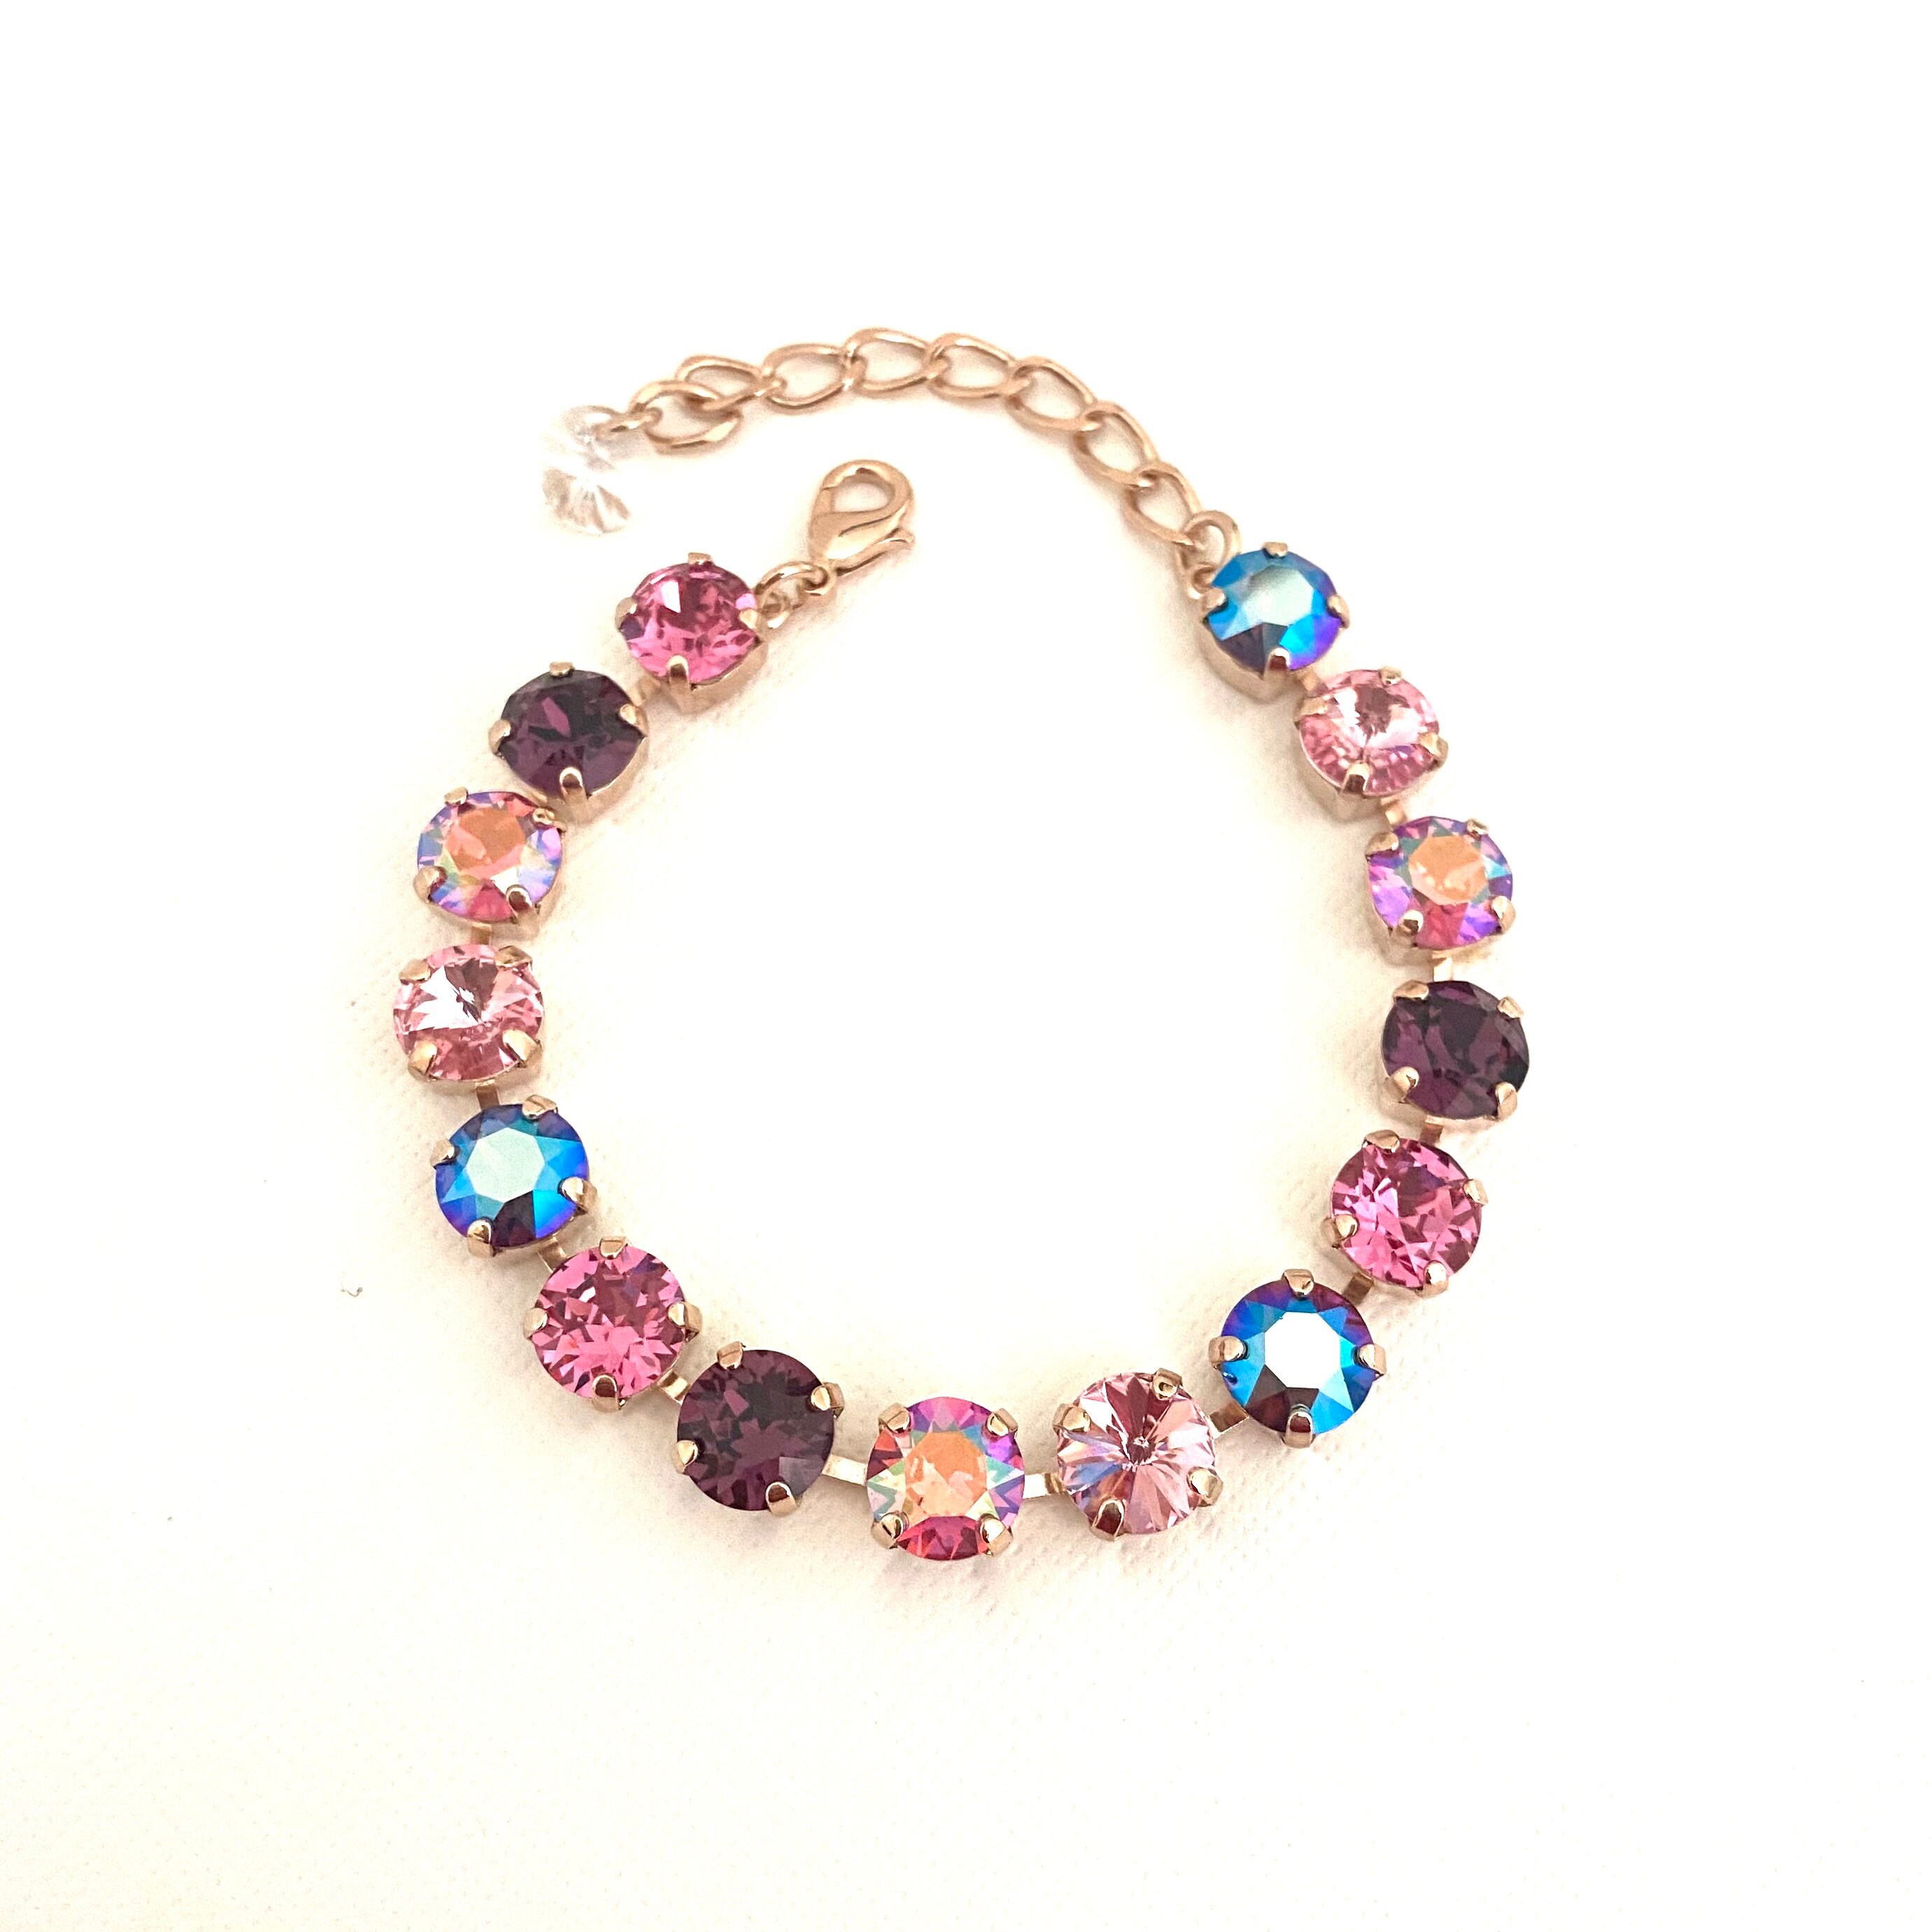 Iridescent Rose AB and Amethyst AB 8mm Mix Crystal Bracelet  Rose Gold Setting  Pink and Purple Bracelet